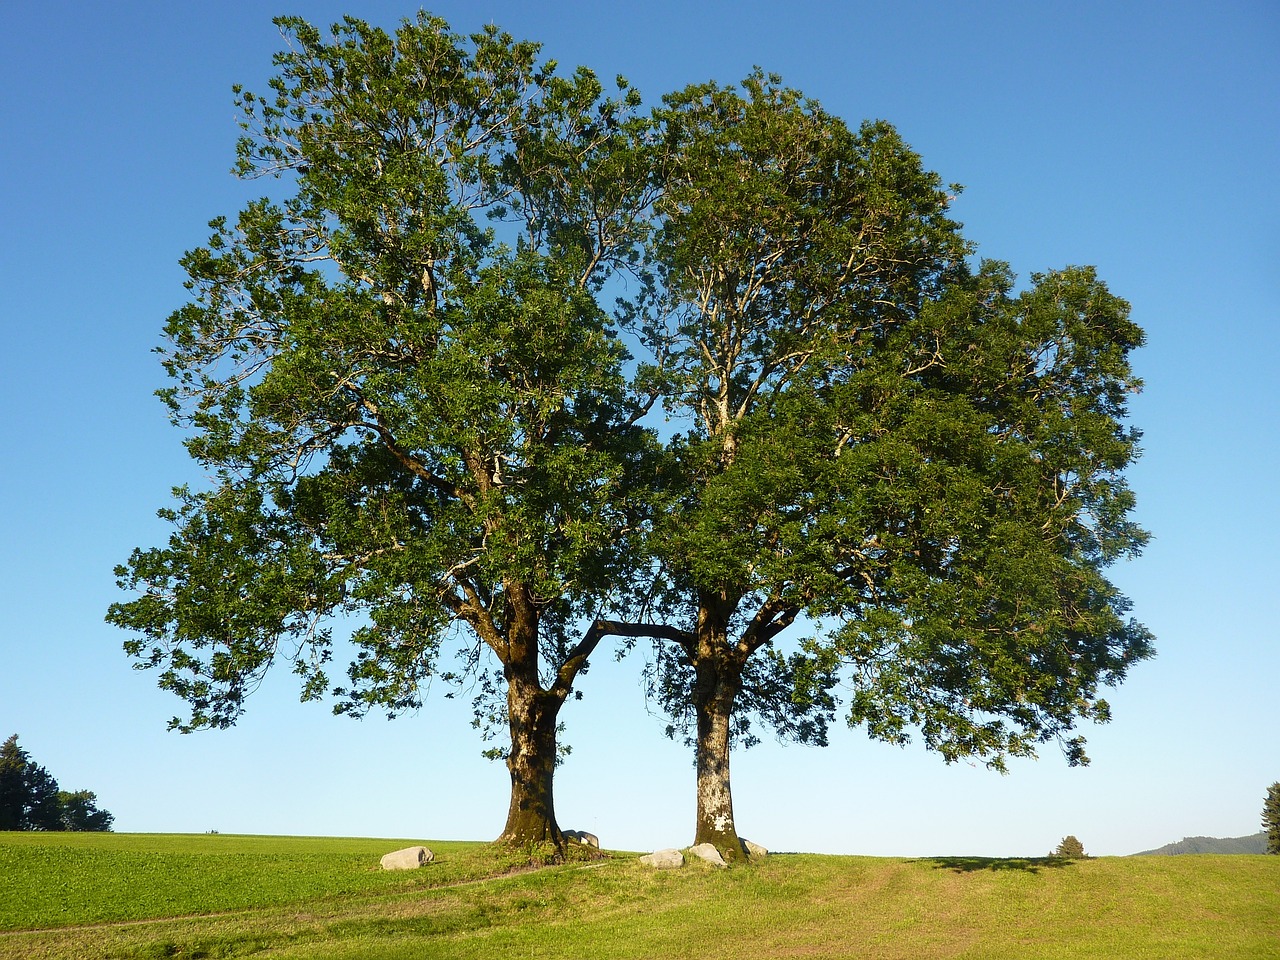 Two large ash trees towering in a field on a sunny day